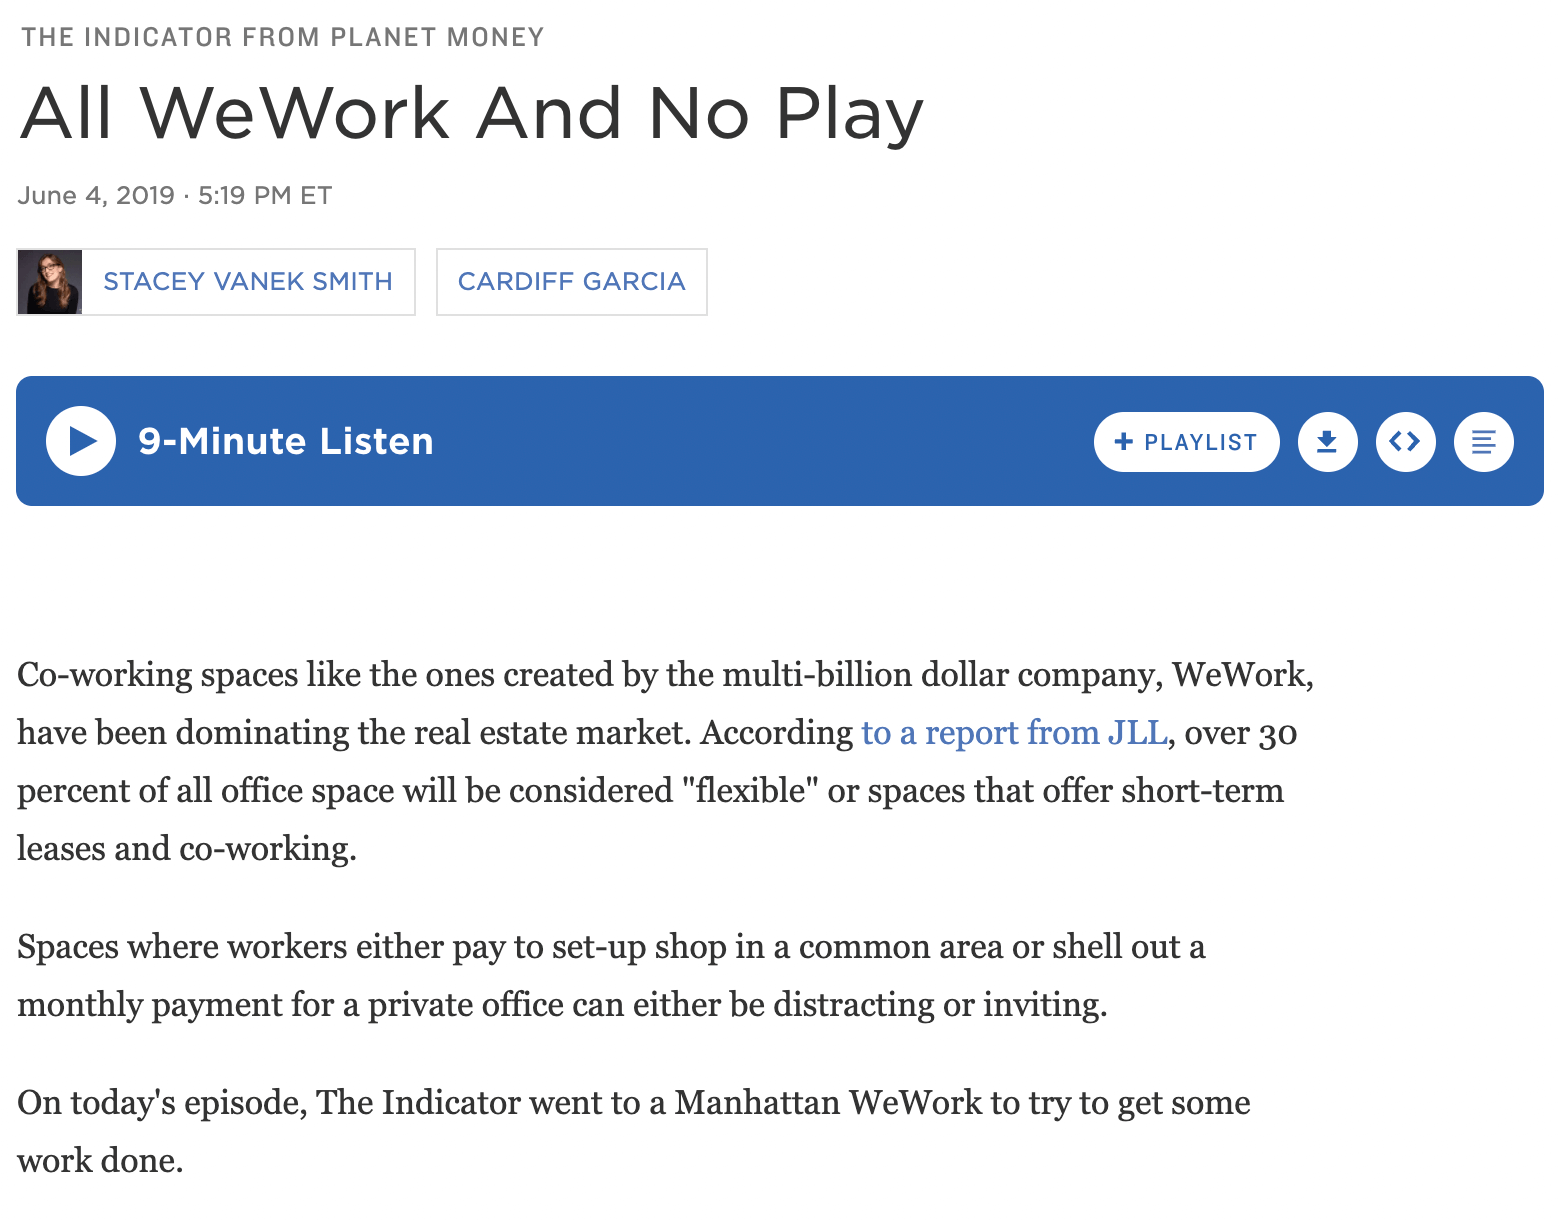 Example of a sponsored podcast by WeWork